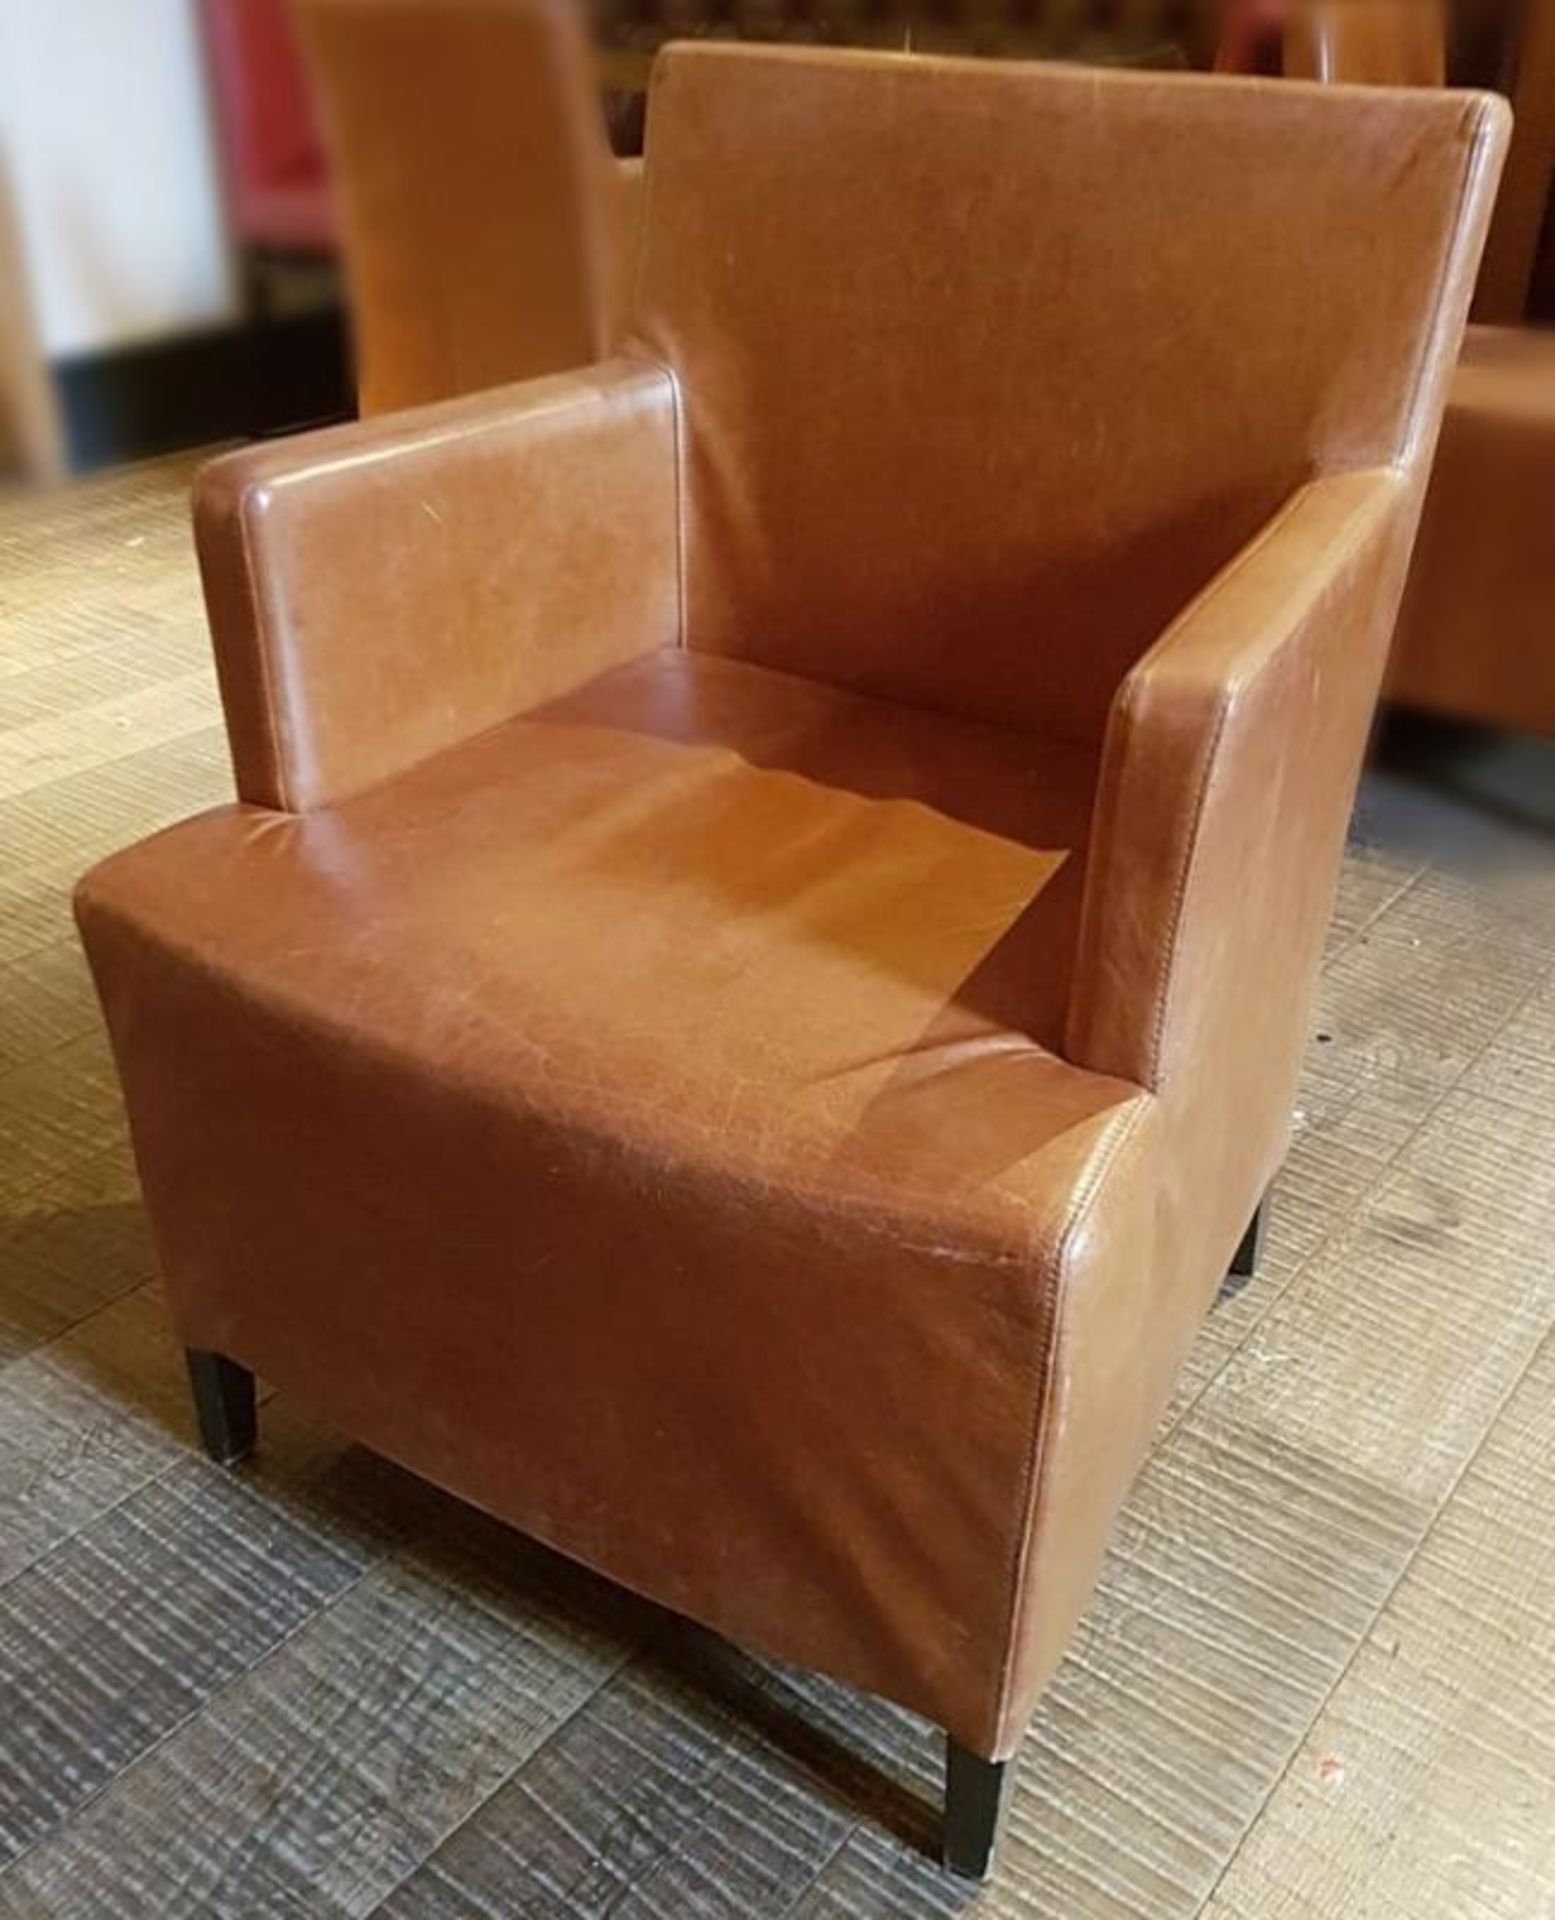 1 x Large Armchair Upholstered In Tan Leather - Recently Removed From A City Centre Steakhouse Resta - Image 4 of 5